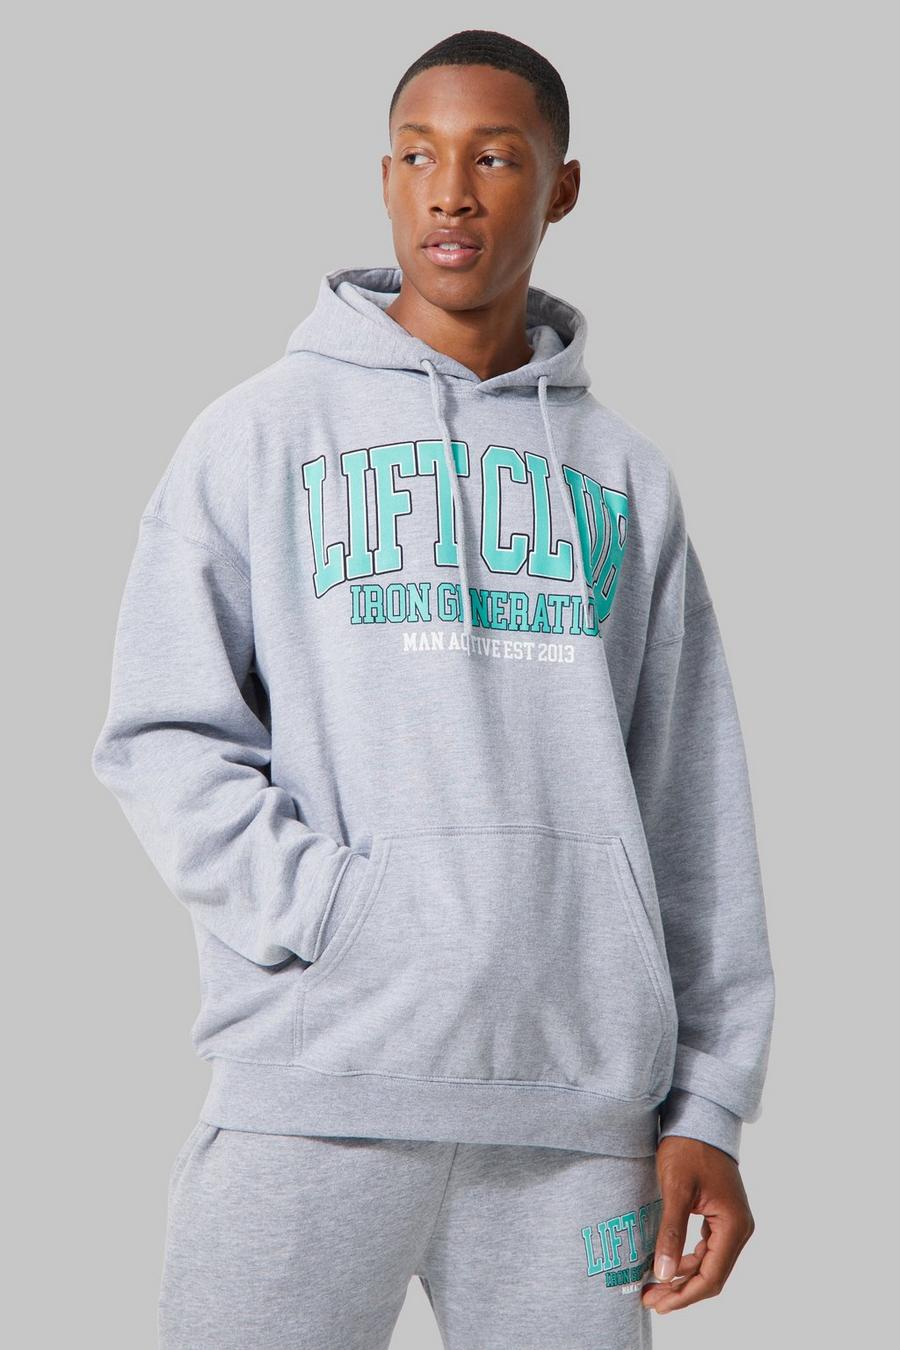 Mens Workout Pullovers | Men's Workout Hoodies | boohoo USA